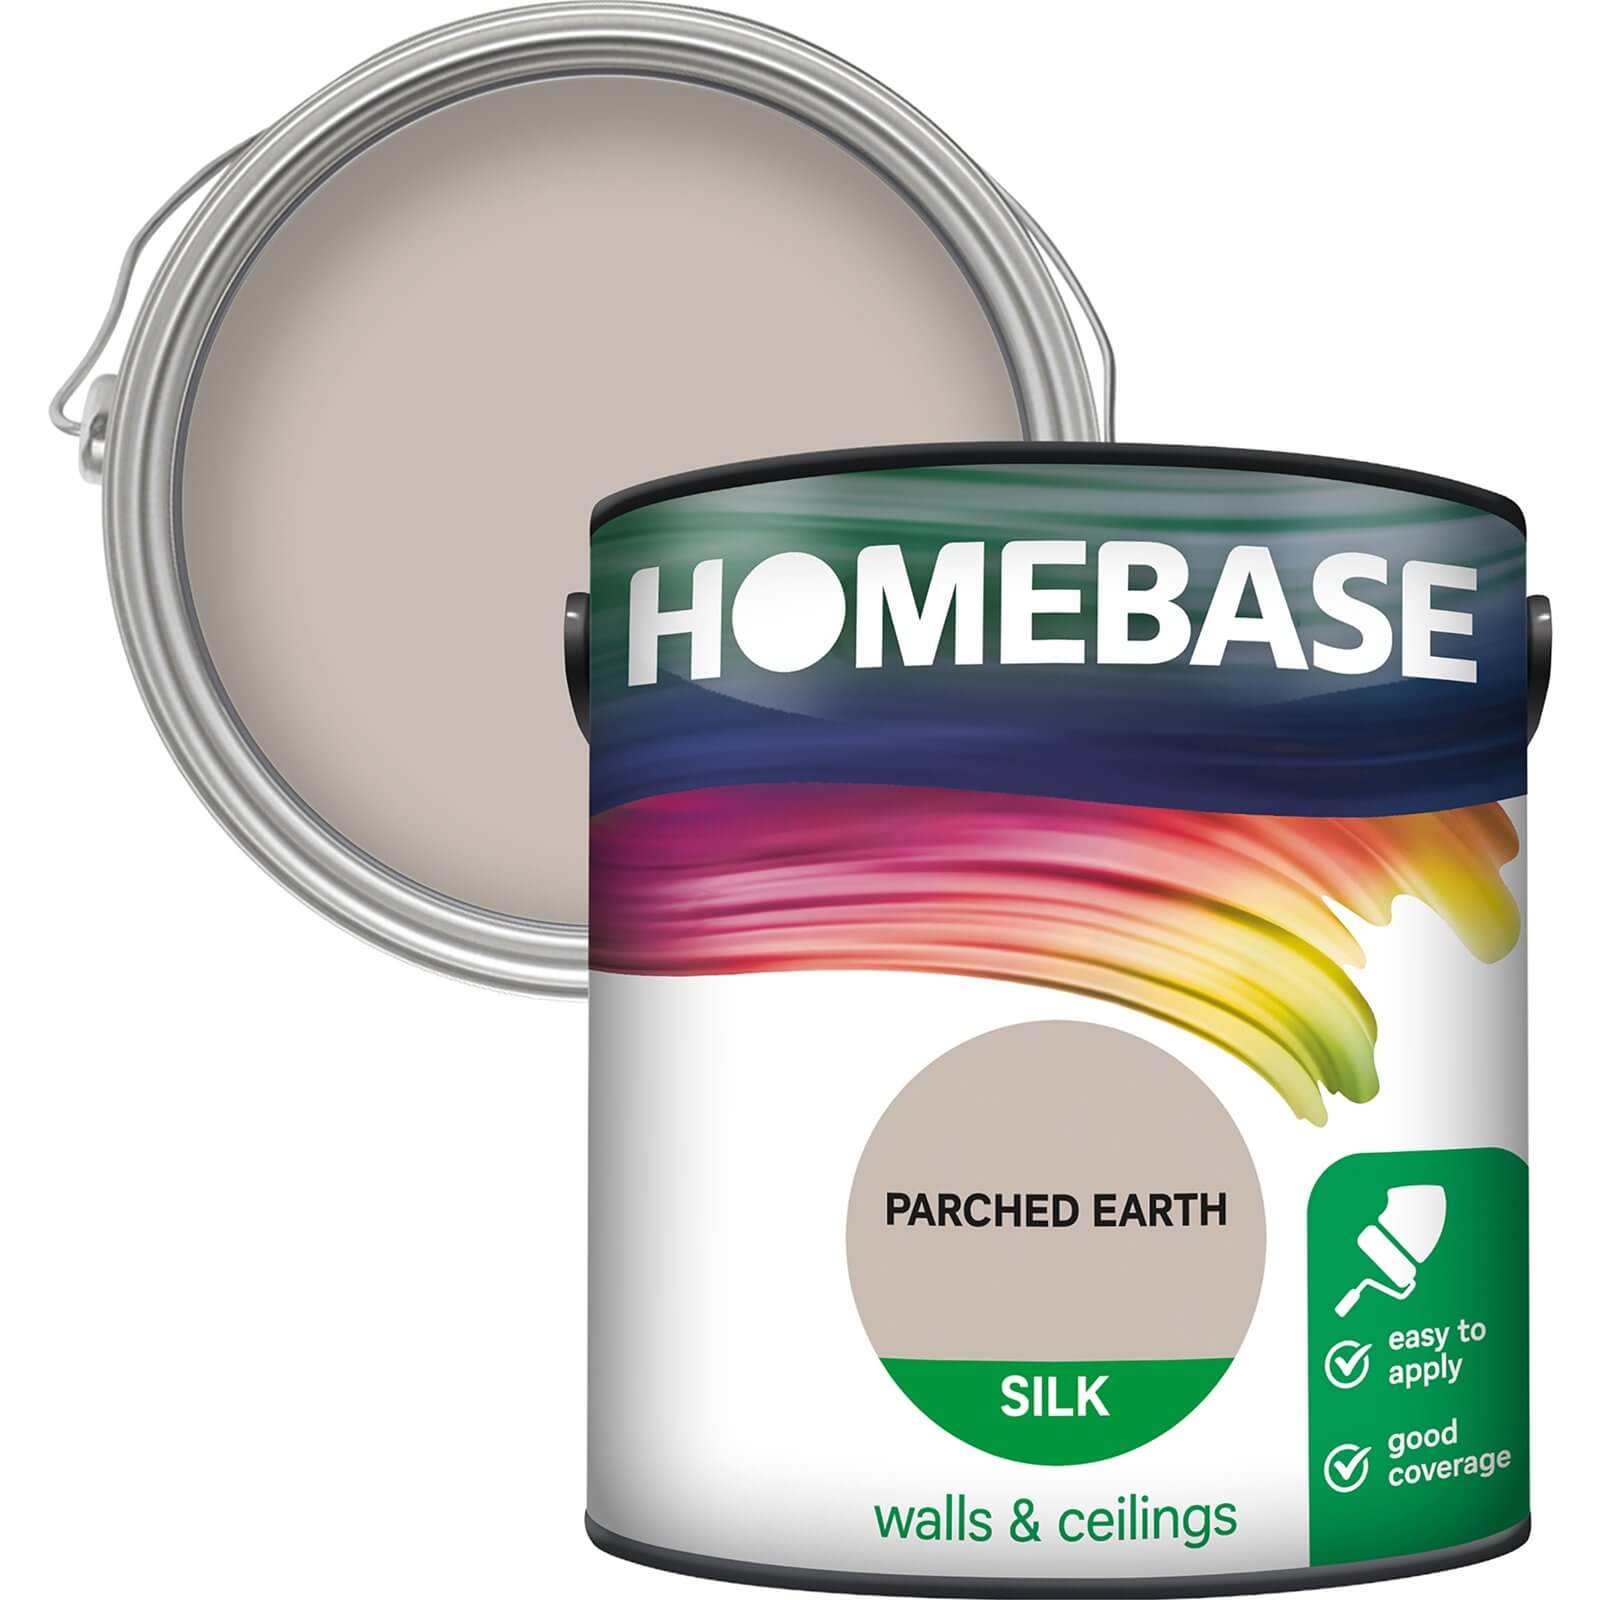 Homebase Silk Emulsion Paint Parched Earth - 2.5L